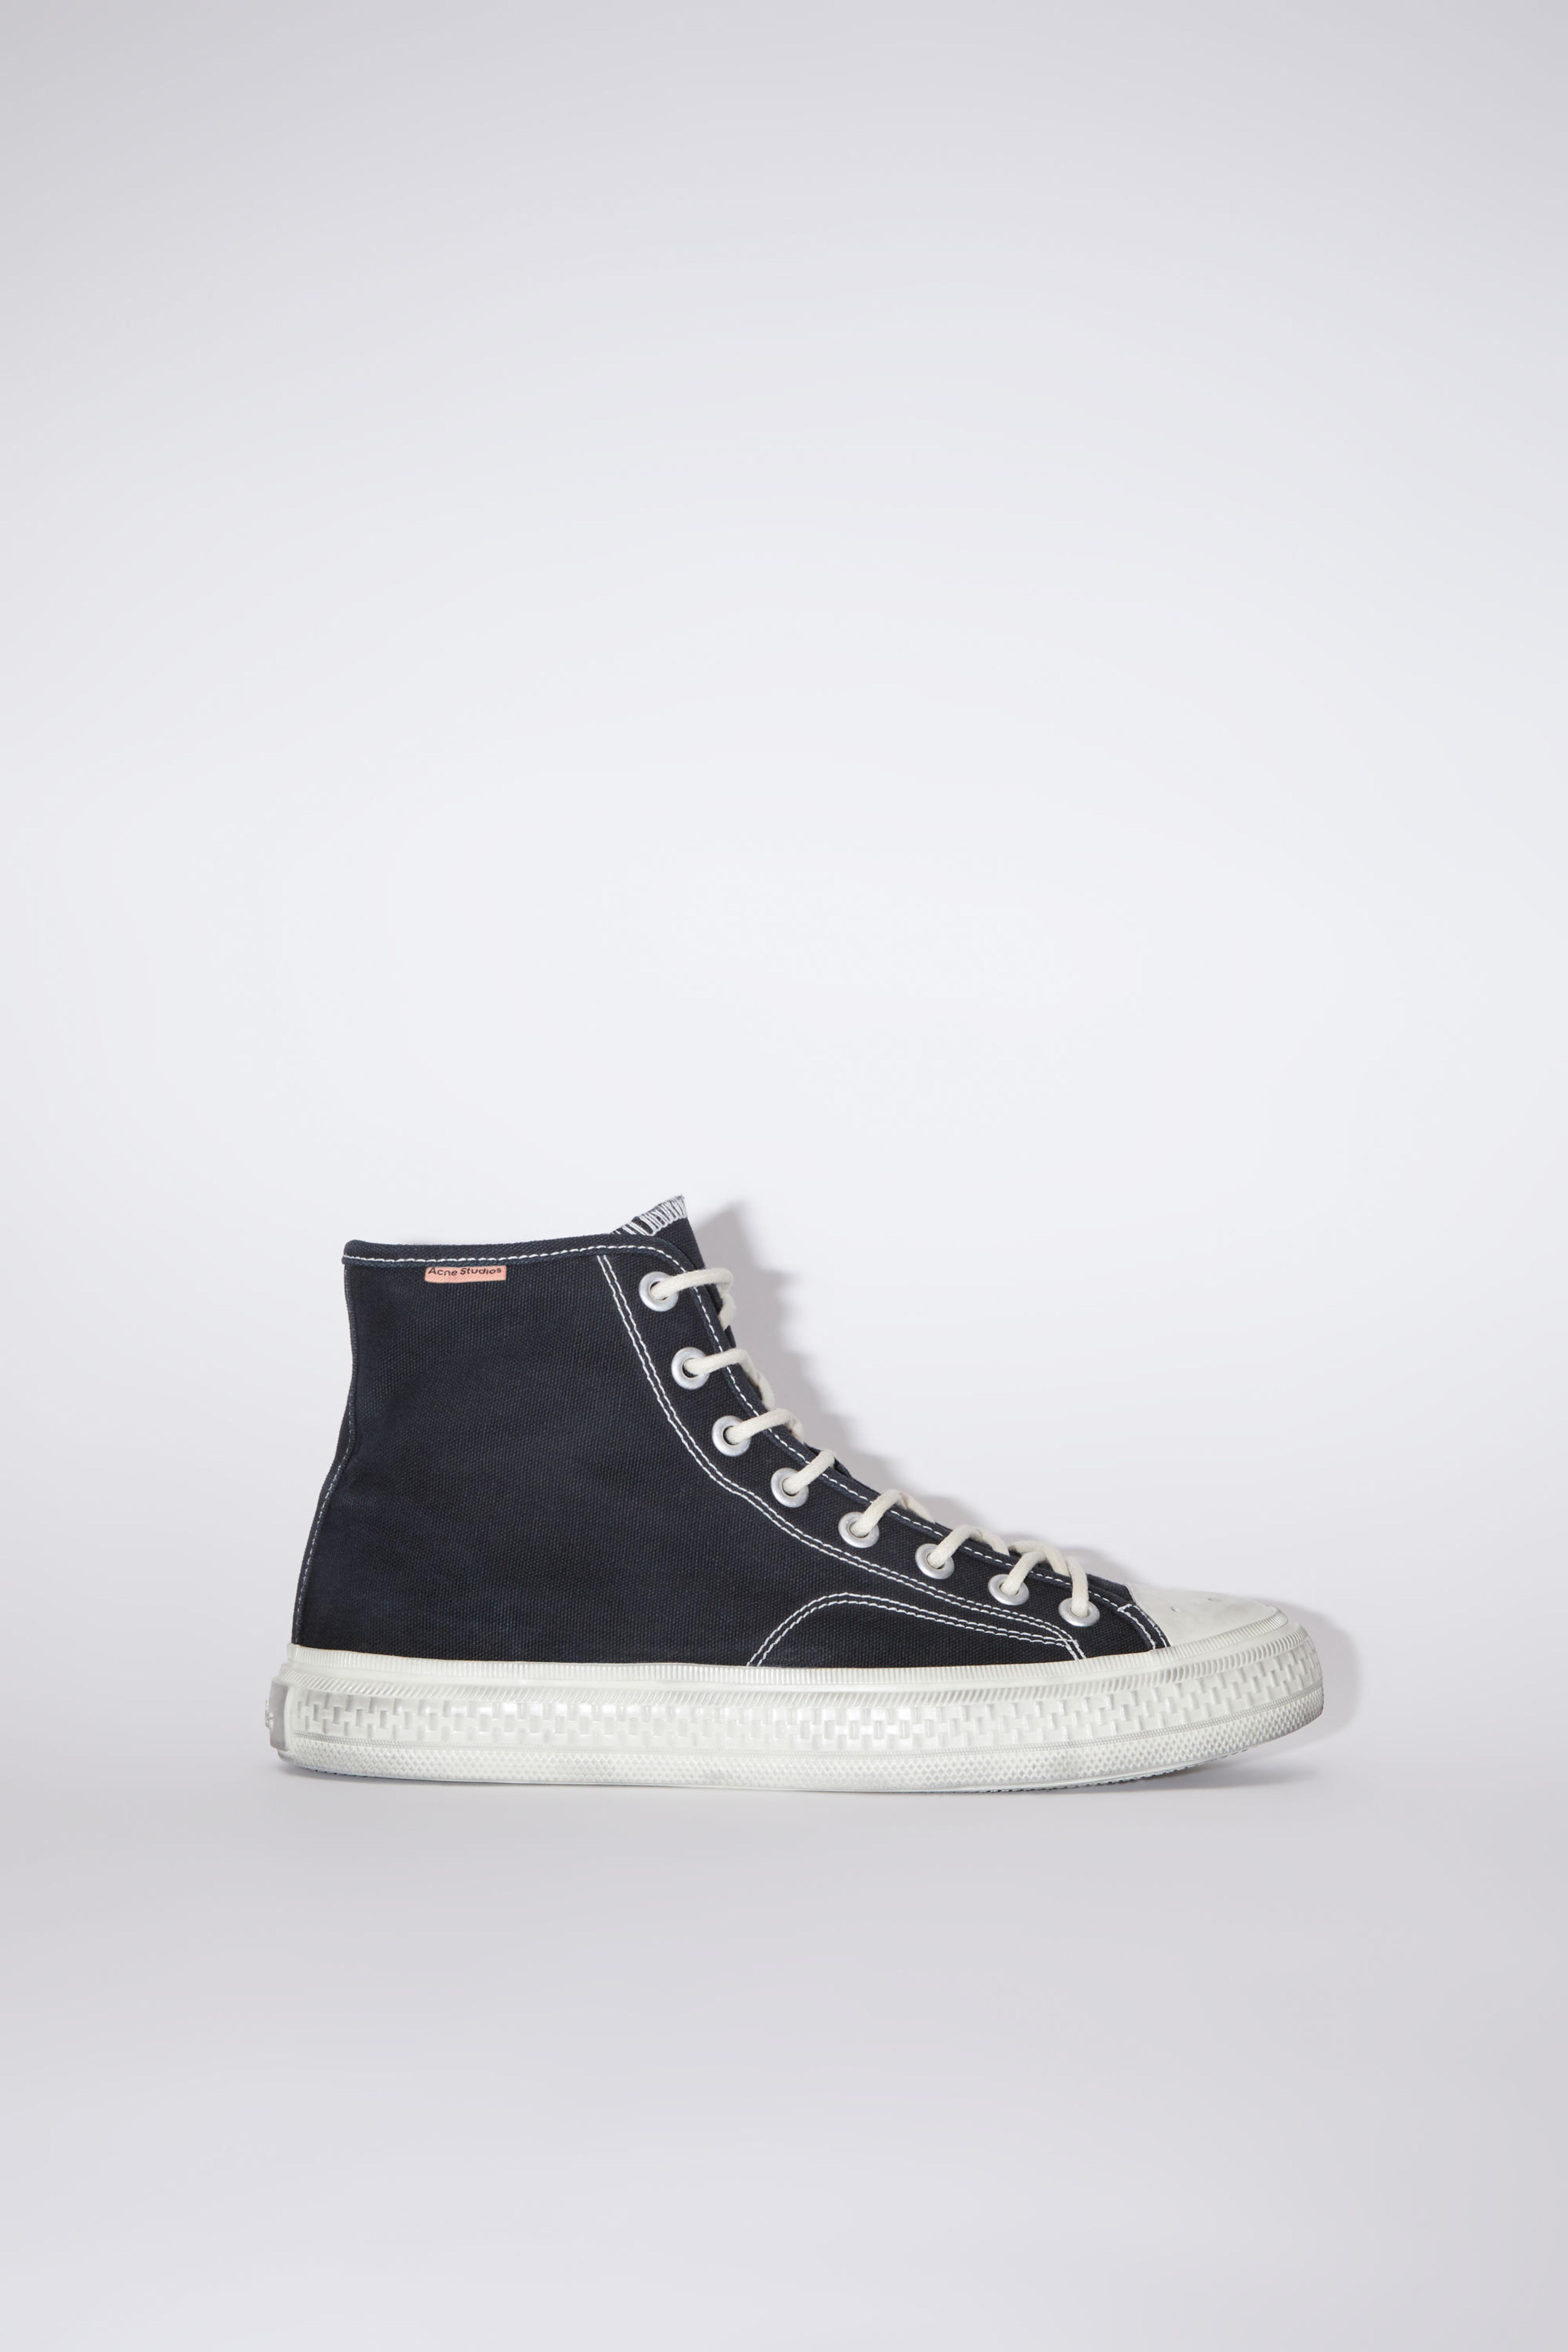 Acne Studios - High top sneakers - Black/off white